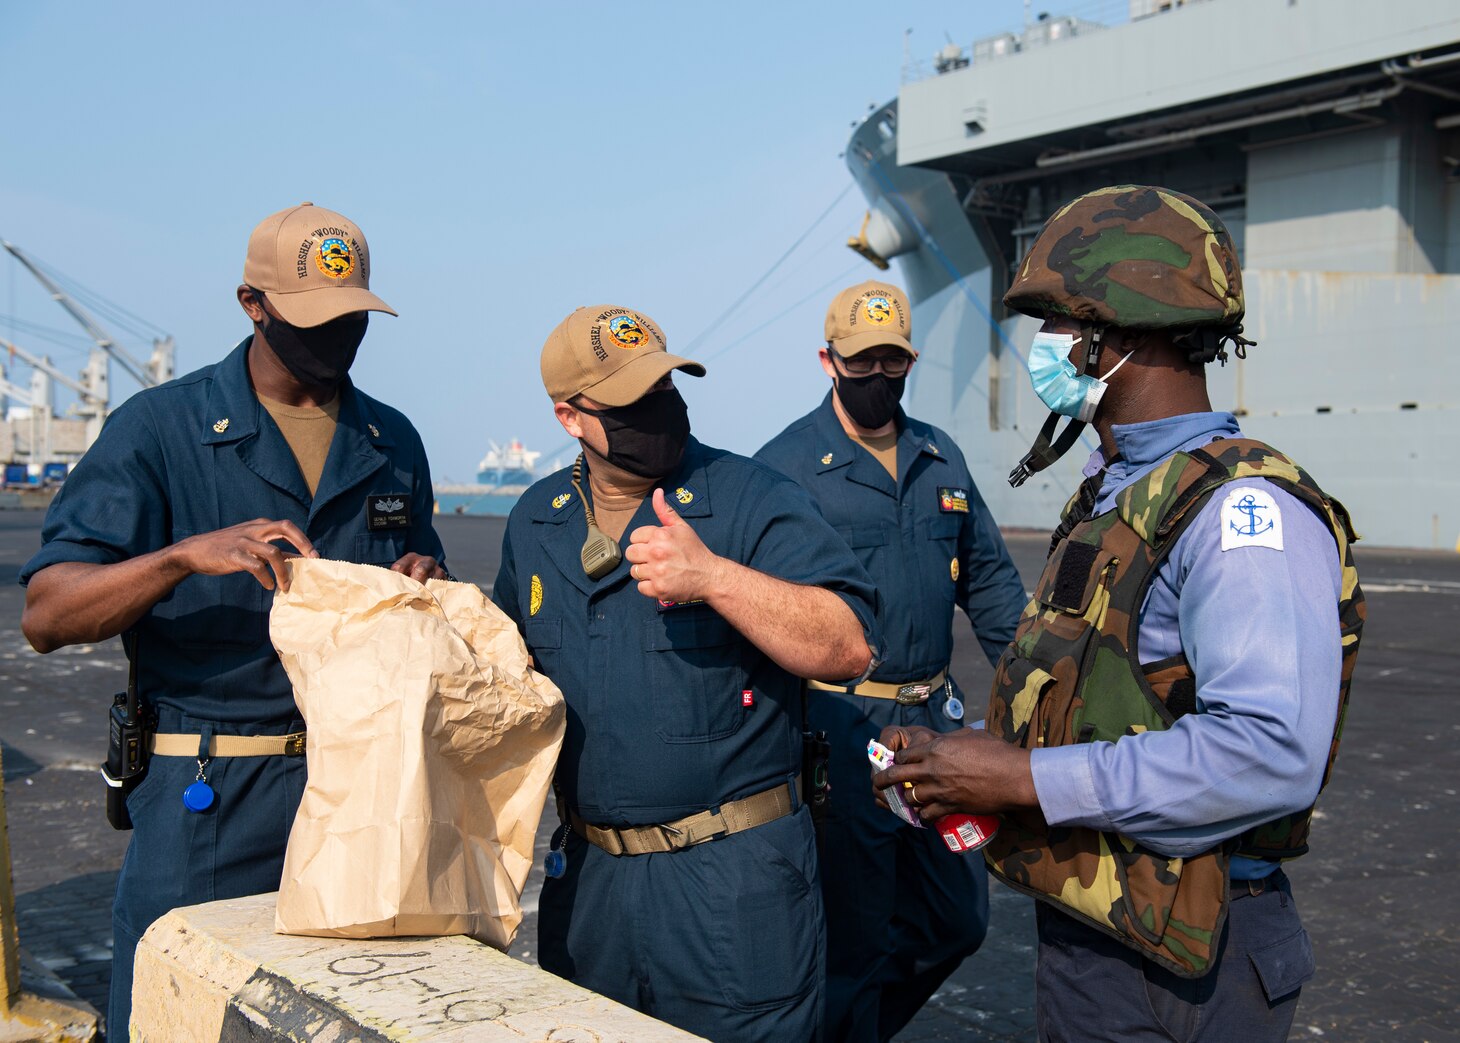 Hershel “Woody” Williams Returns to Gulf of Guinea, Strengthening Partnership with Coastal African Nations